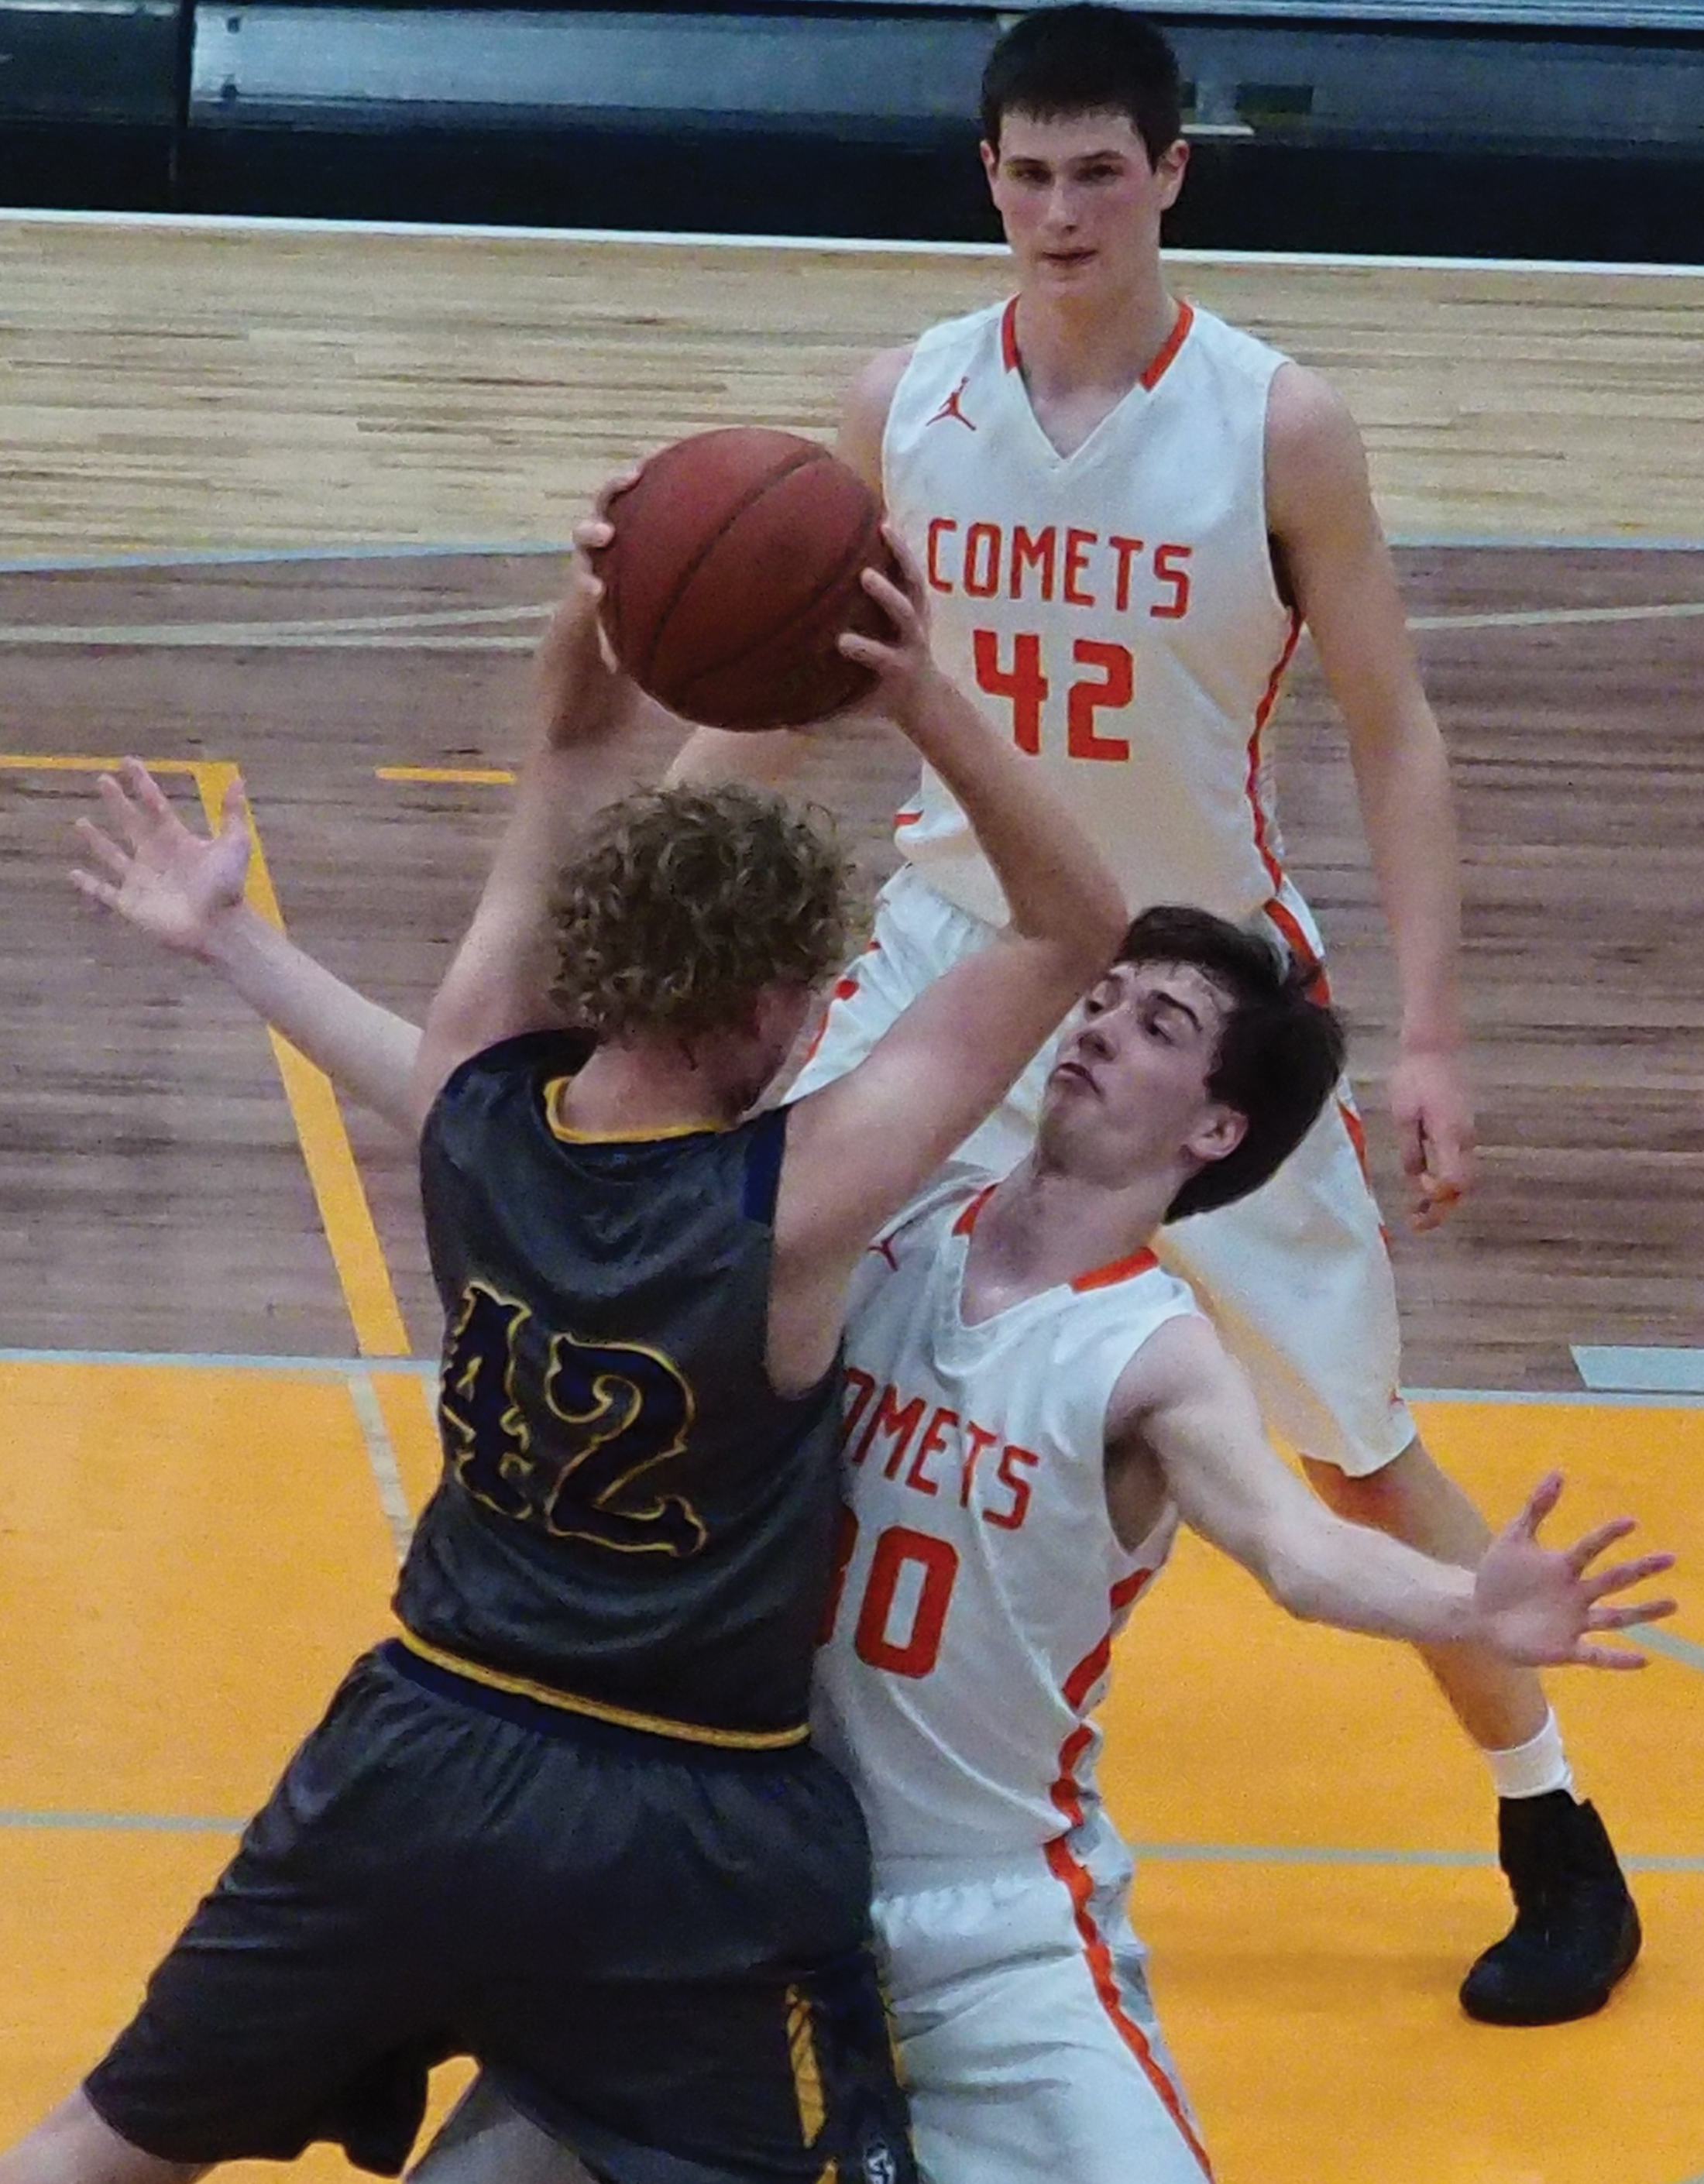 Comet boys back in win column with 63-42 victory over Huskies